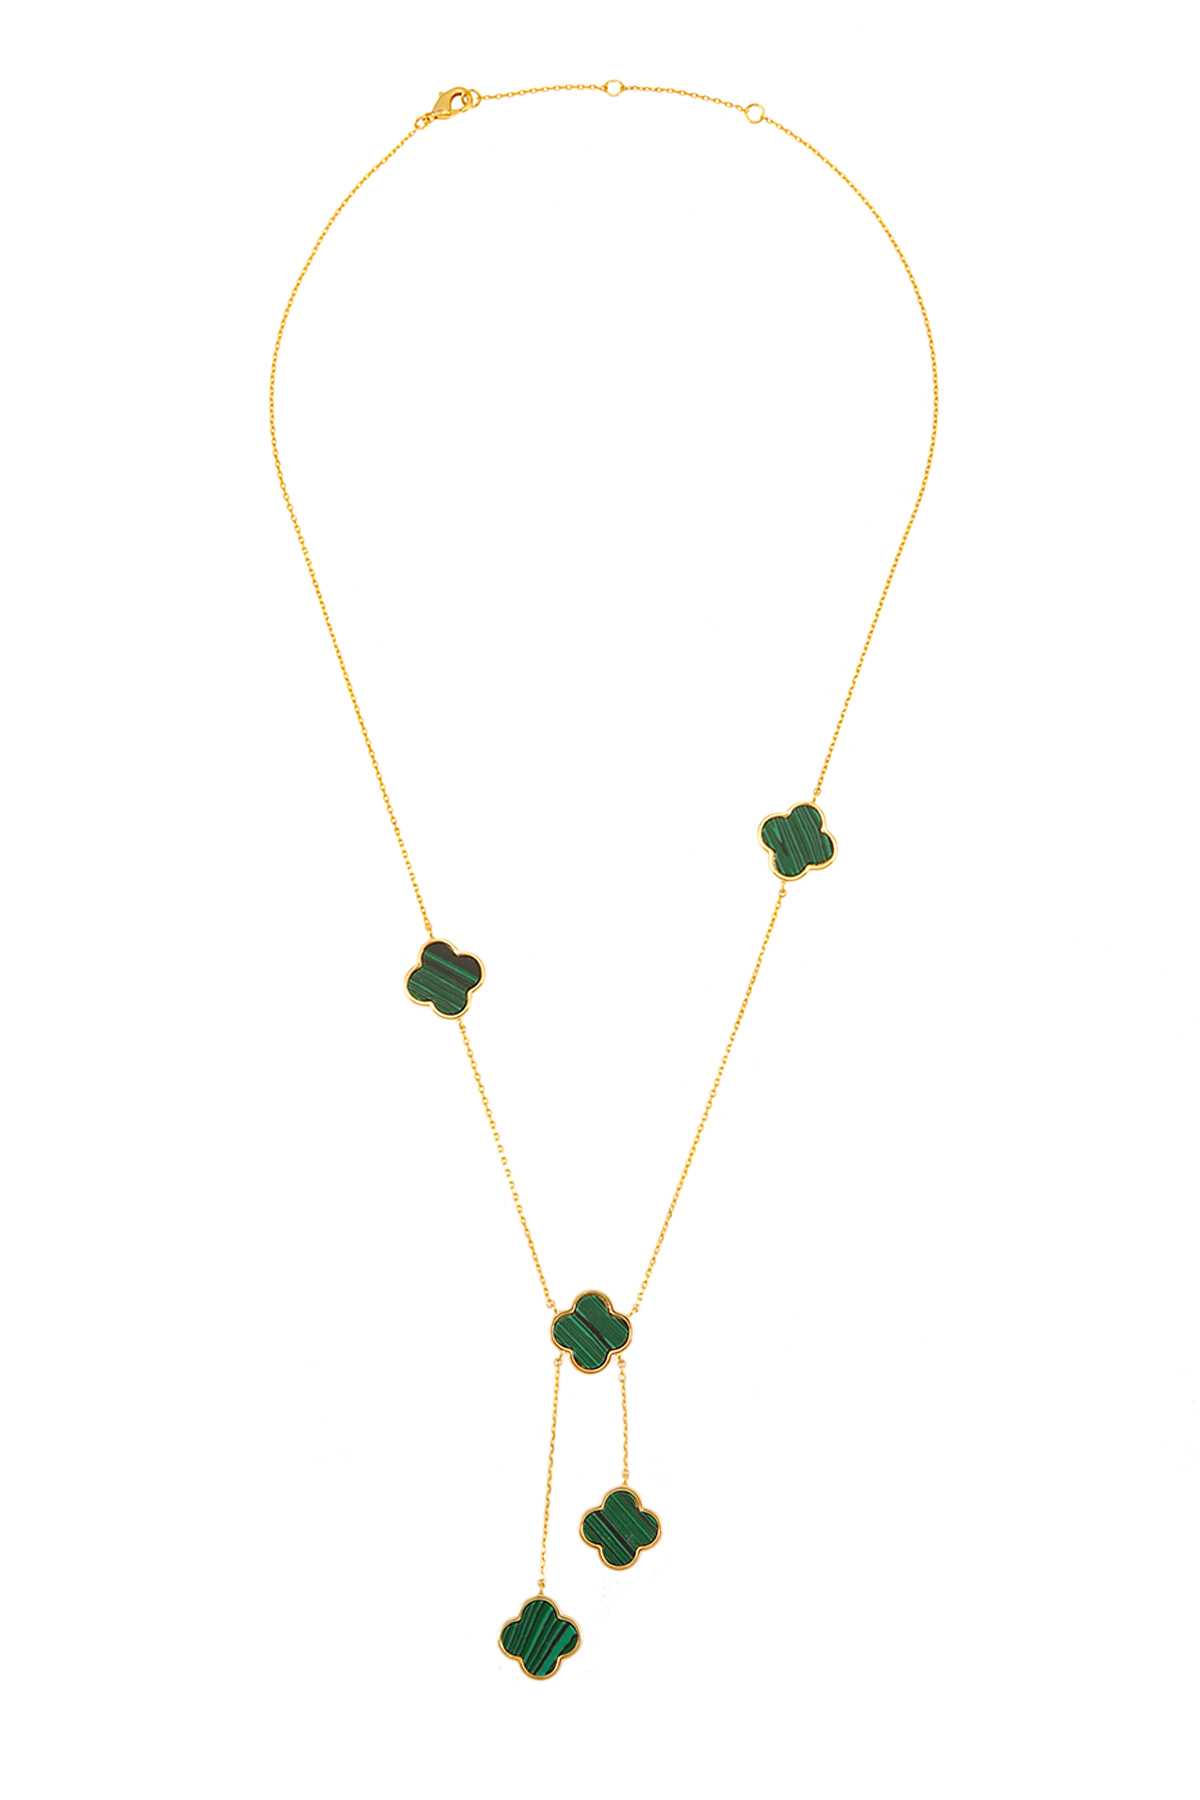 Mother of Pearl 5 Clovers Drop Necklace